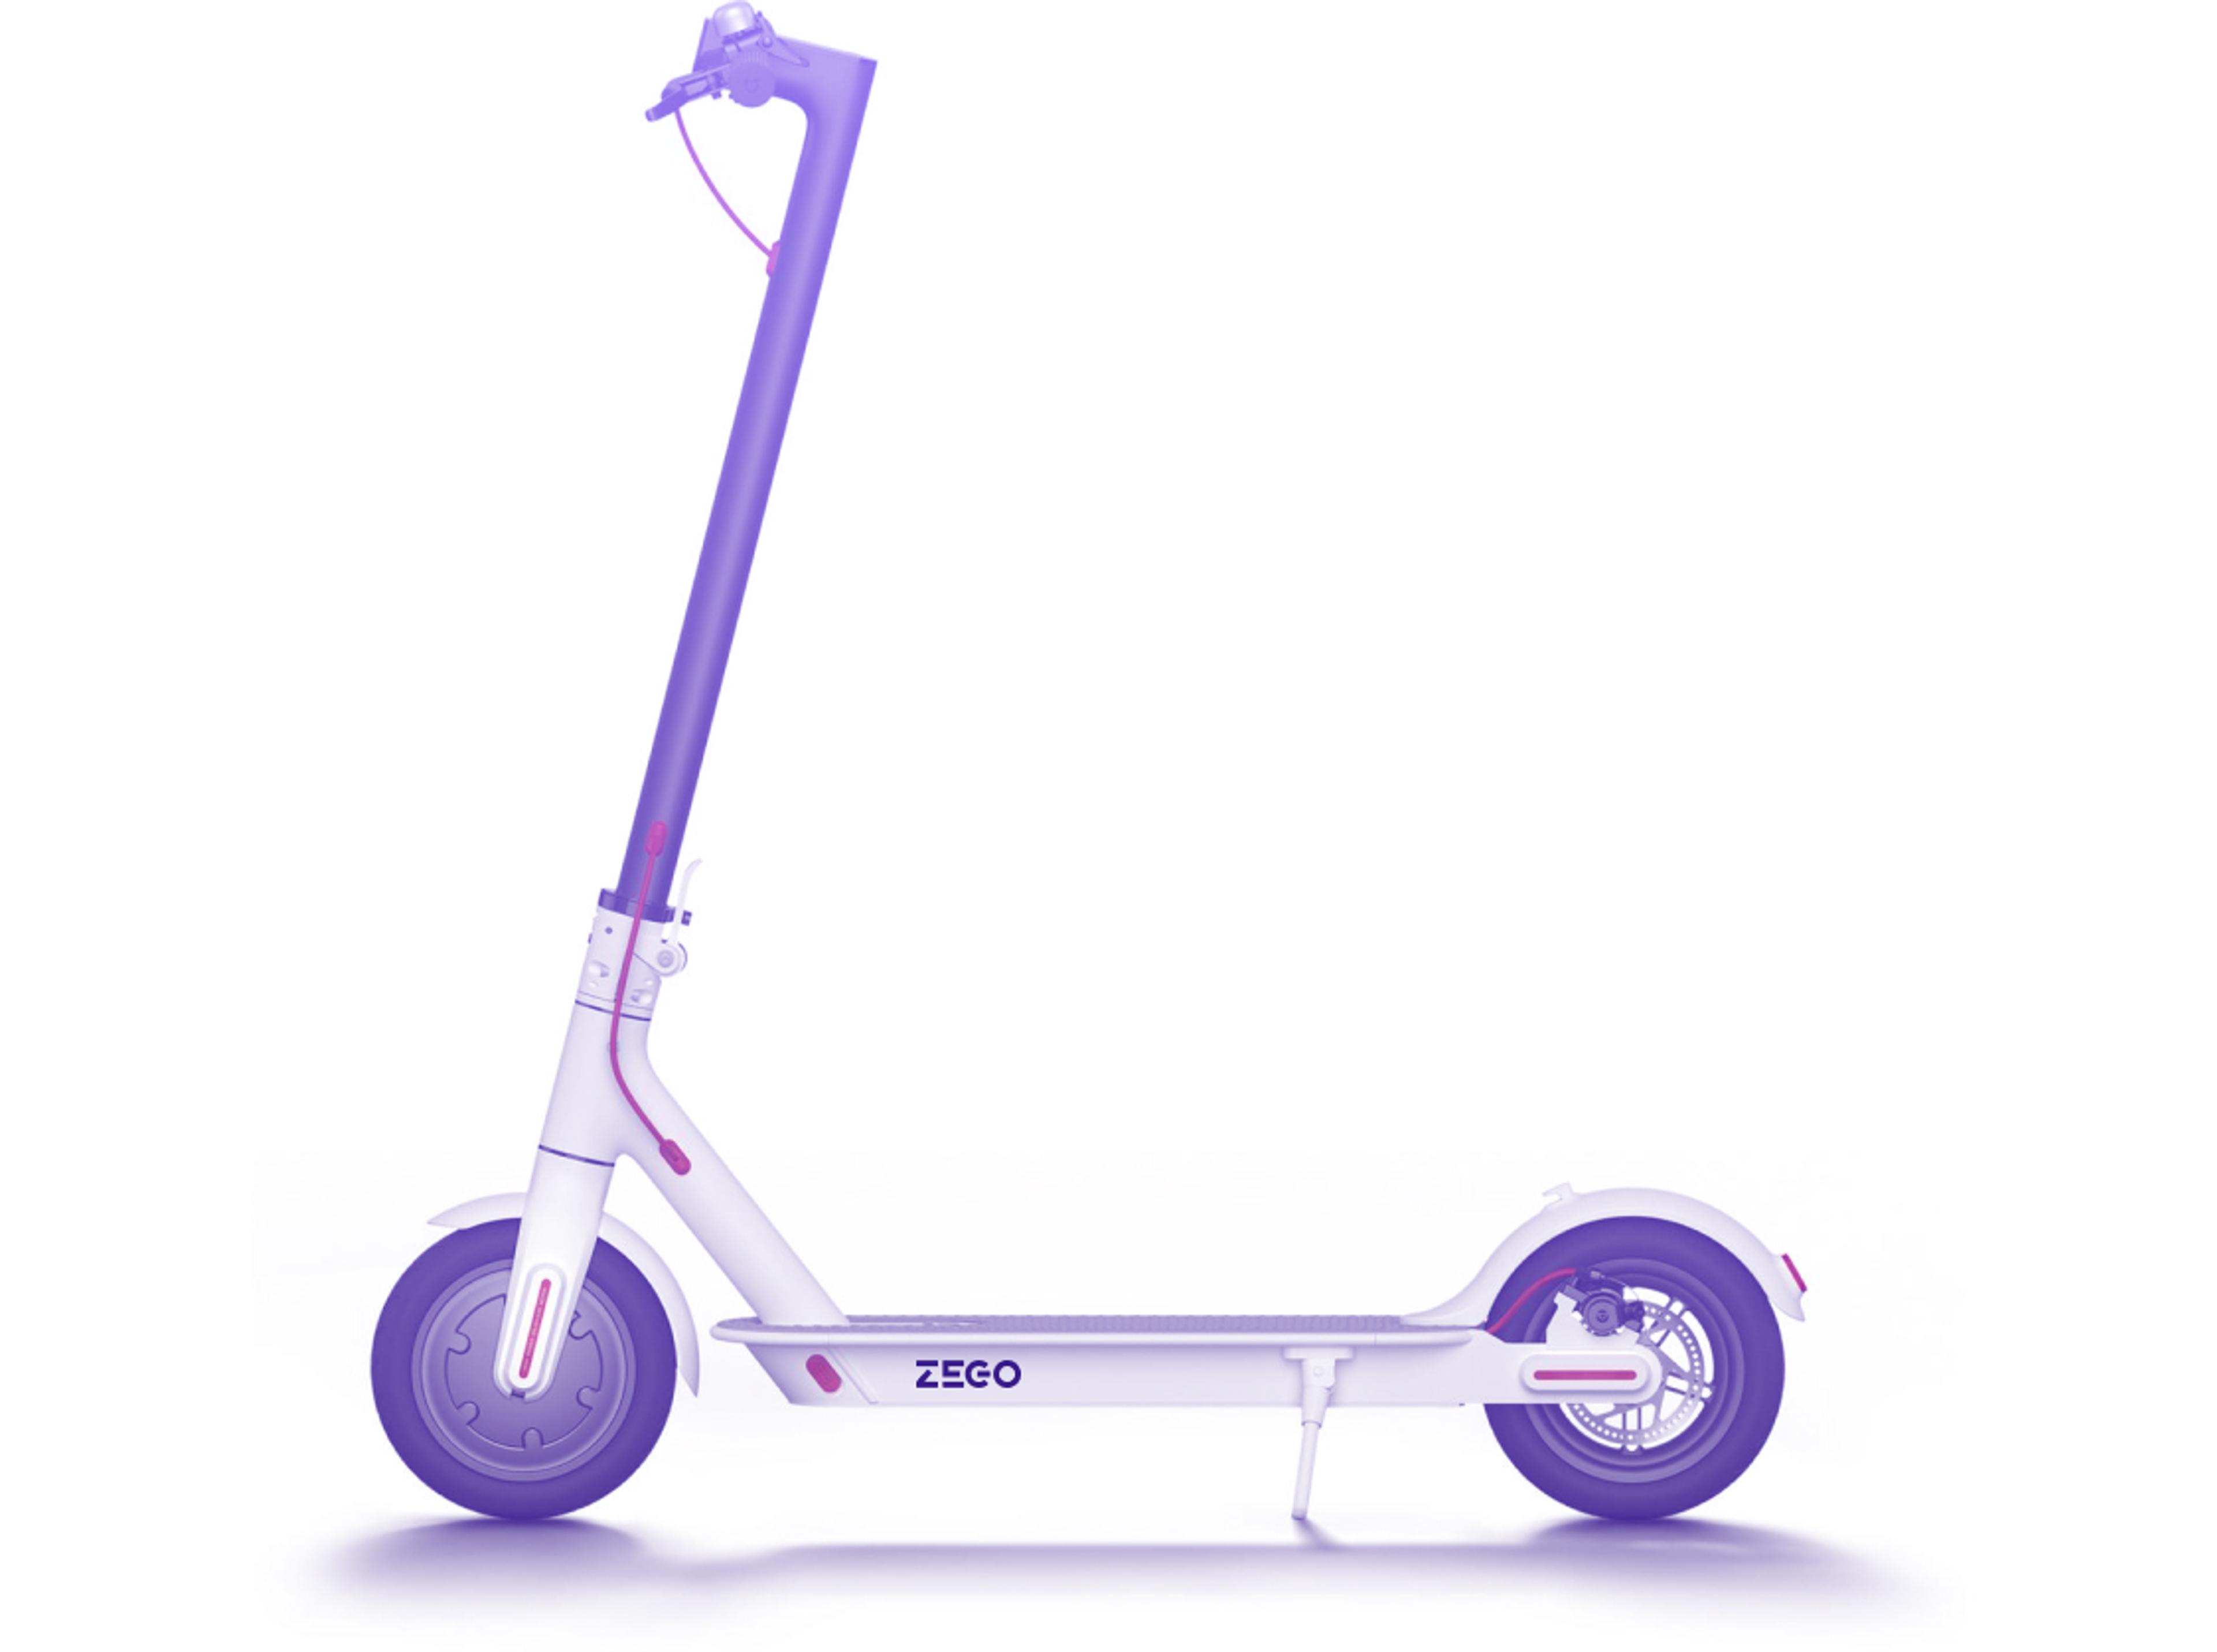 Supporting the trial of e-scooters in the UK